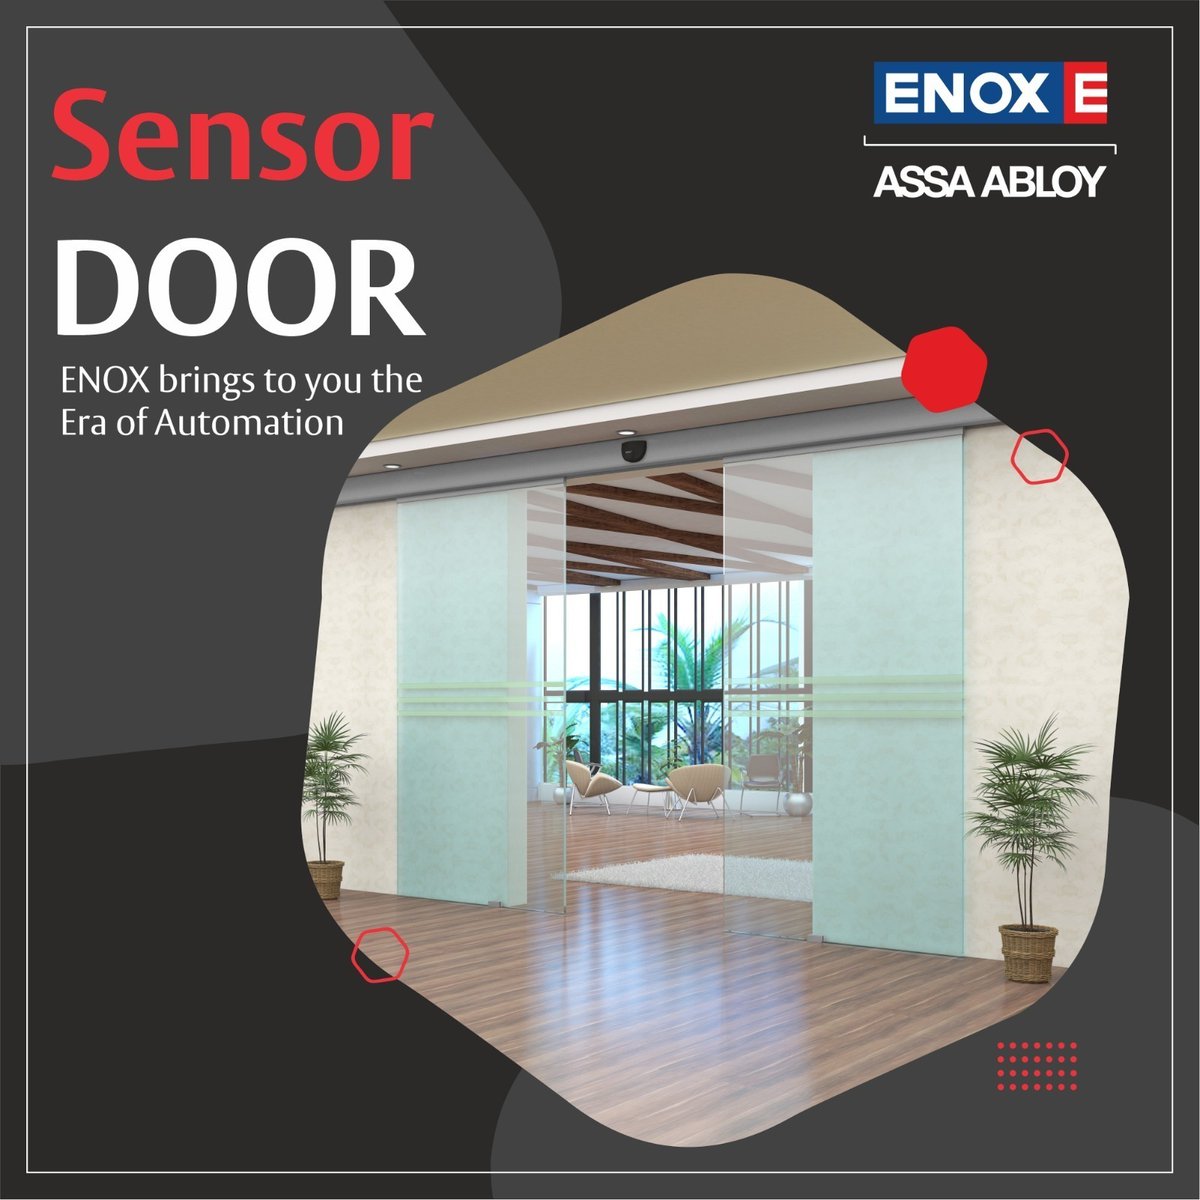 Welcome to the Era of Automation! ENOX Sensor Doors are revolutionizing entryways, making every step effortless and secure.
#ENOXProducts #ENOX #ENOXIndia #AutomationEra #AutomaticSensorDoor #AutomaticSlidingDoor #SlidingDoors #SensorDoors